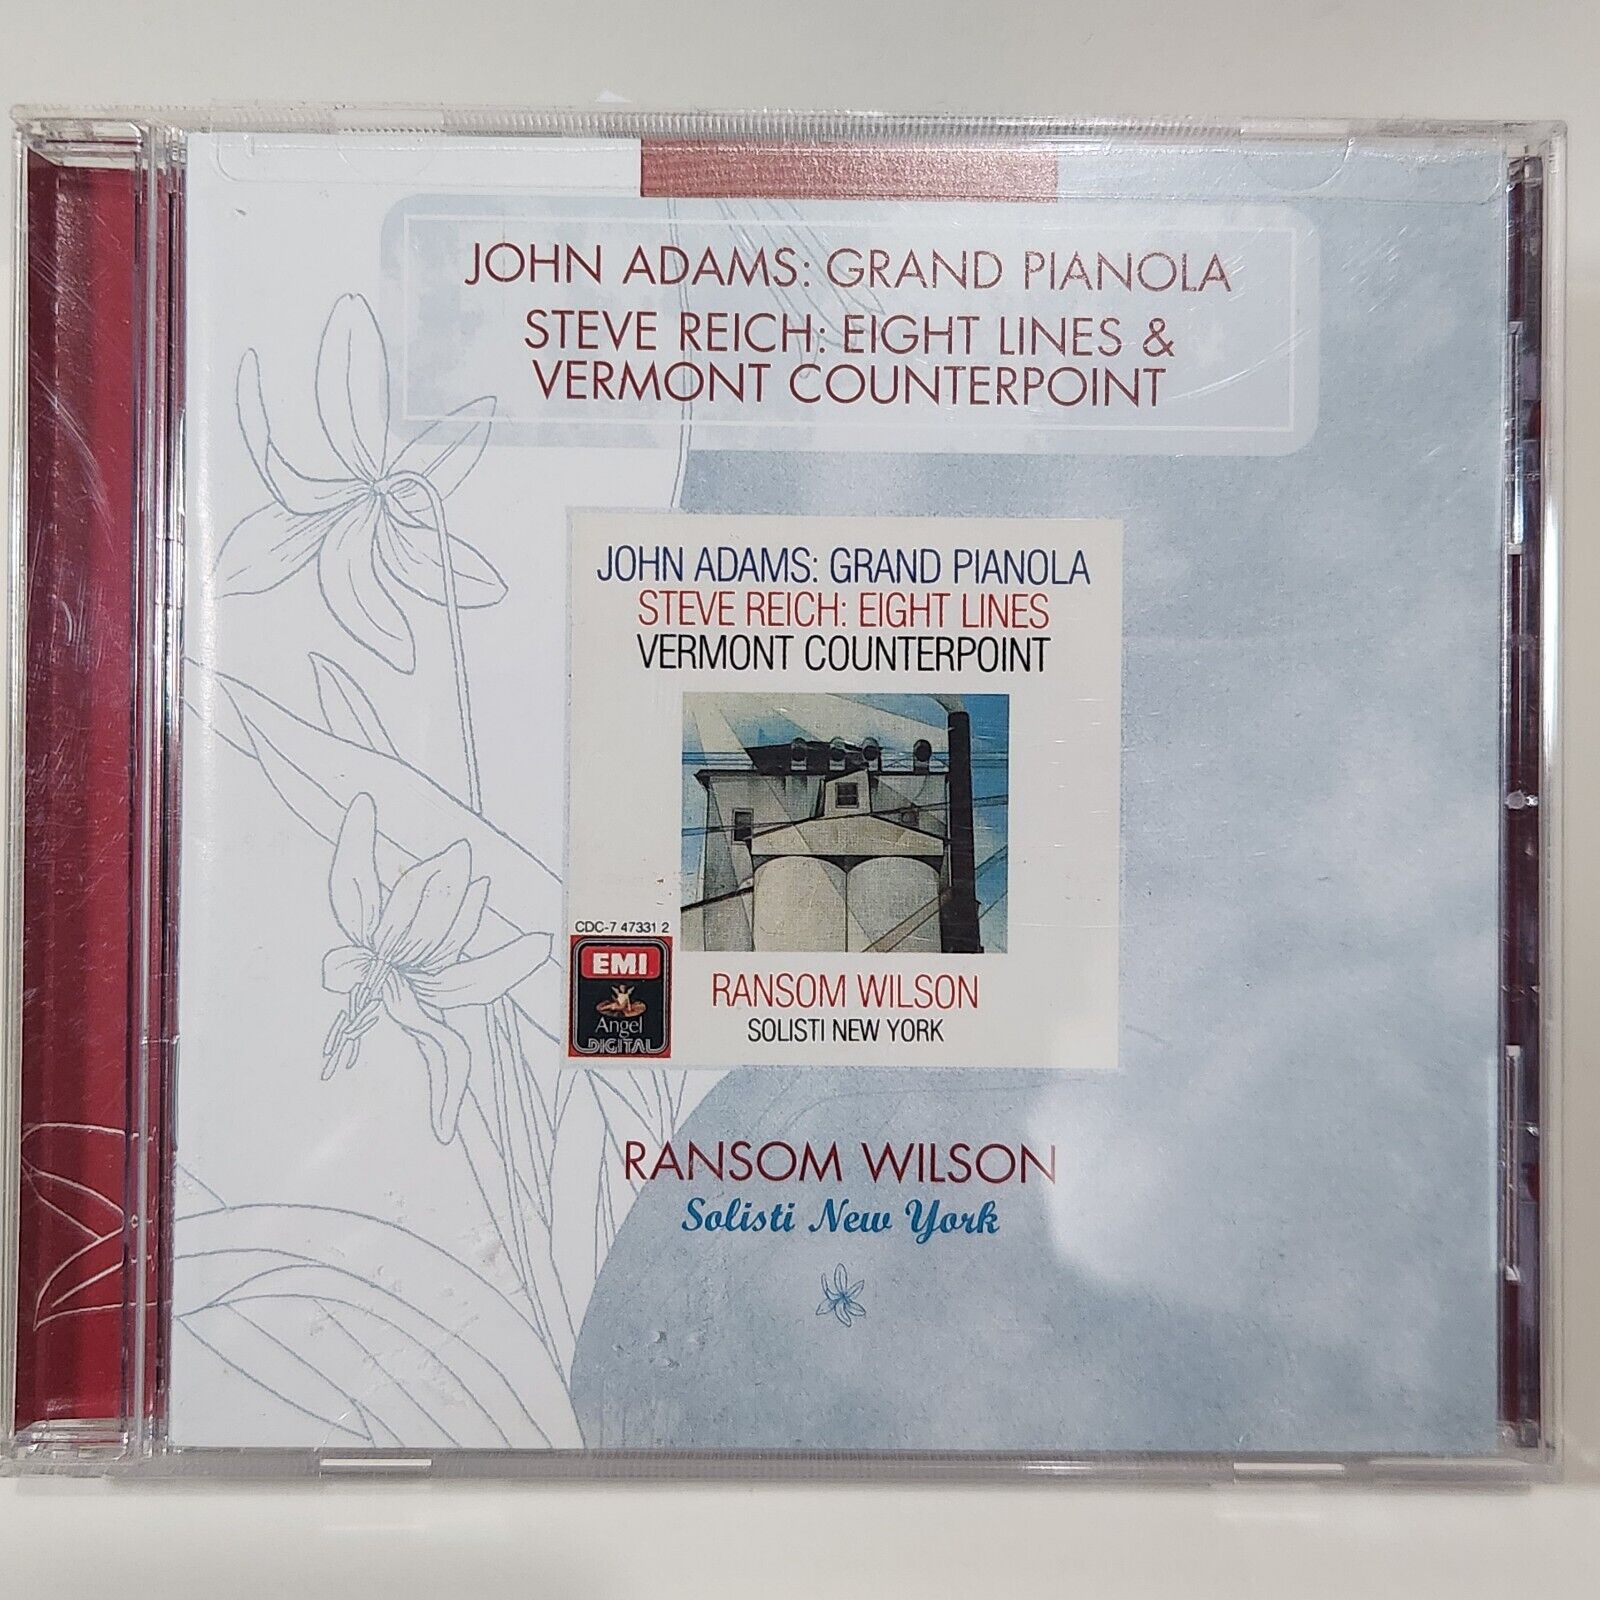 John Adams Grand Pianola Music Steve Reich Eight Lines and Vermont Counterpoint